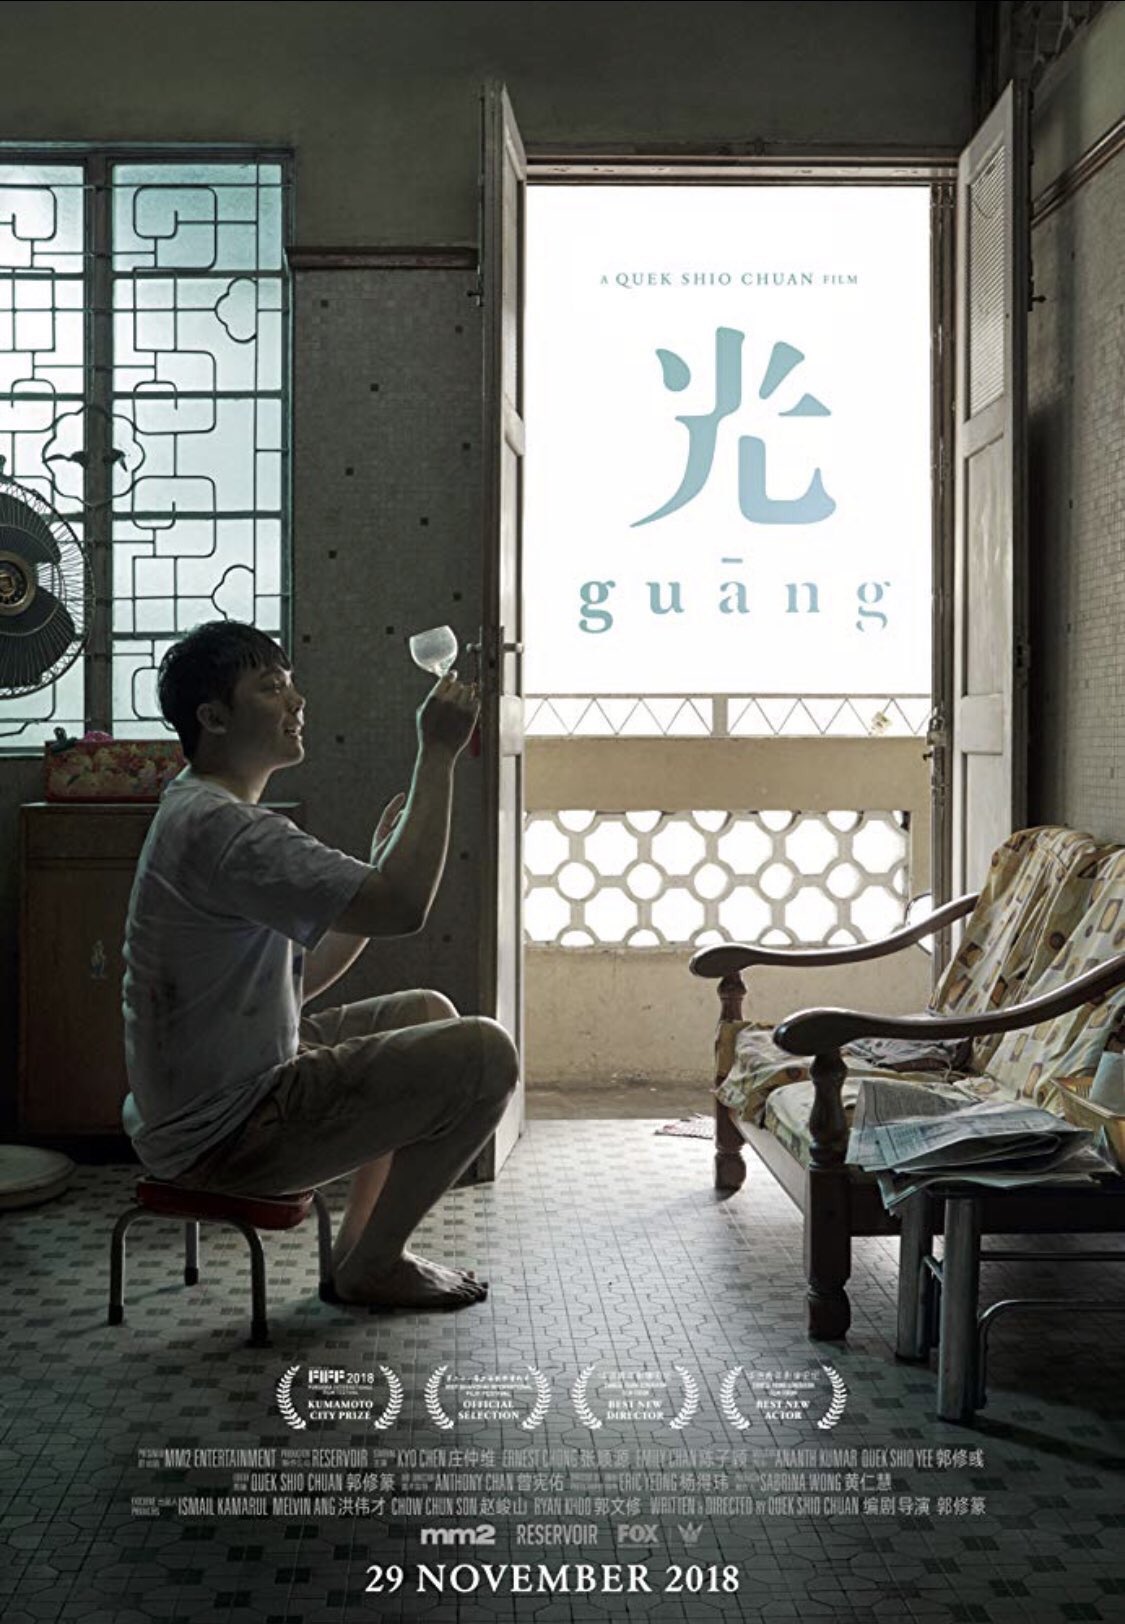 Guang tells the story of a young man with autism and his struggle to find a job. — Picture from Twitter/RekomenByAsrul